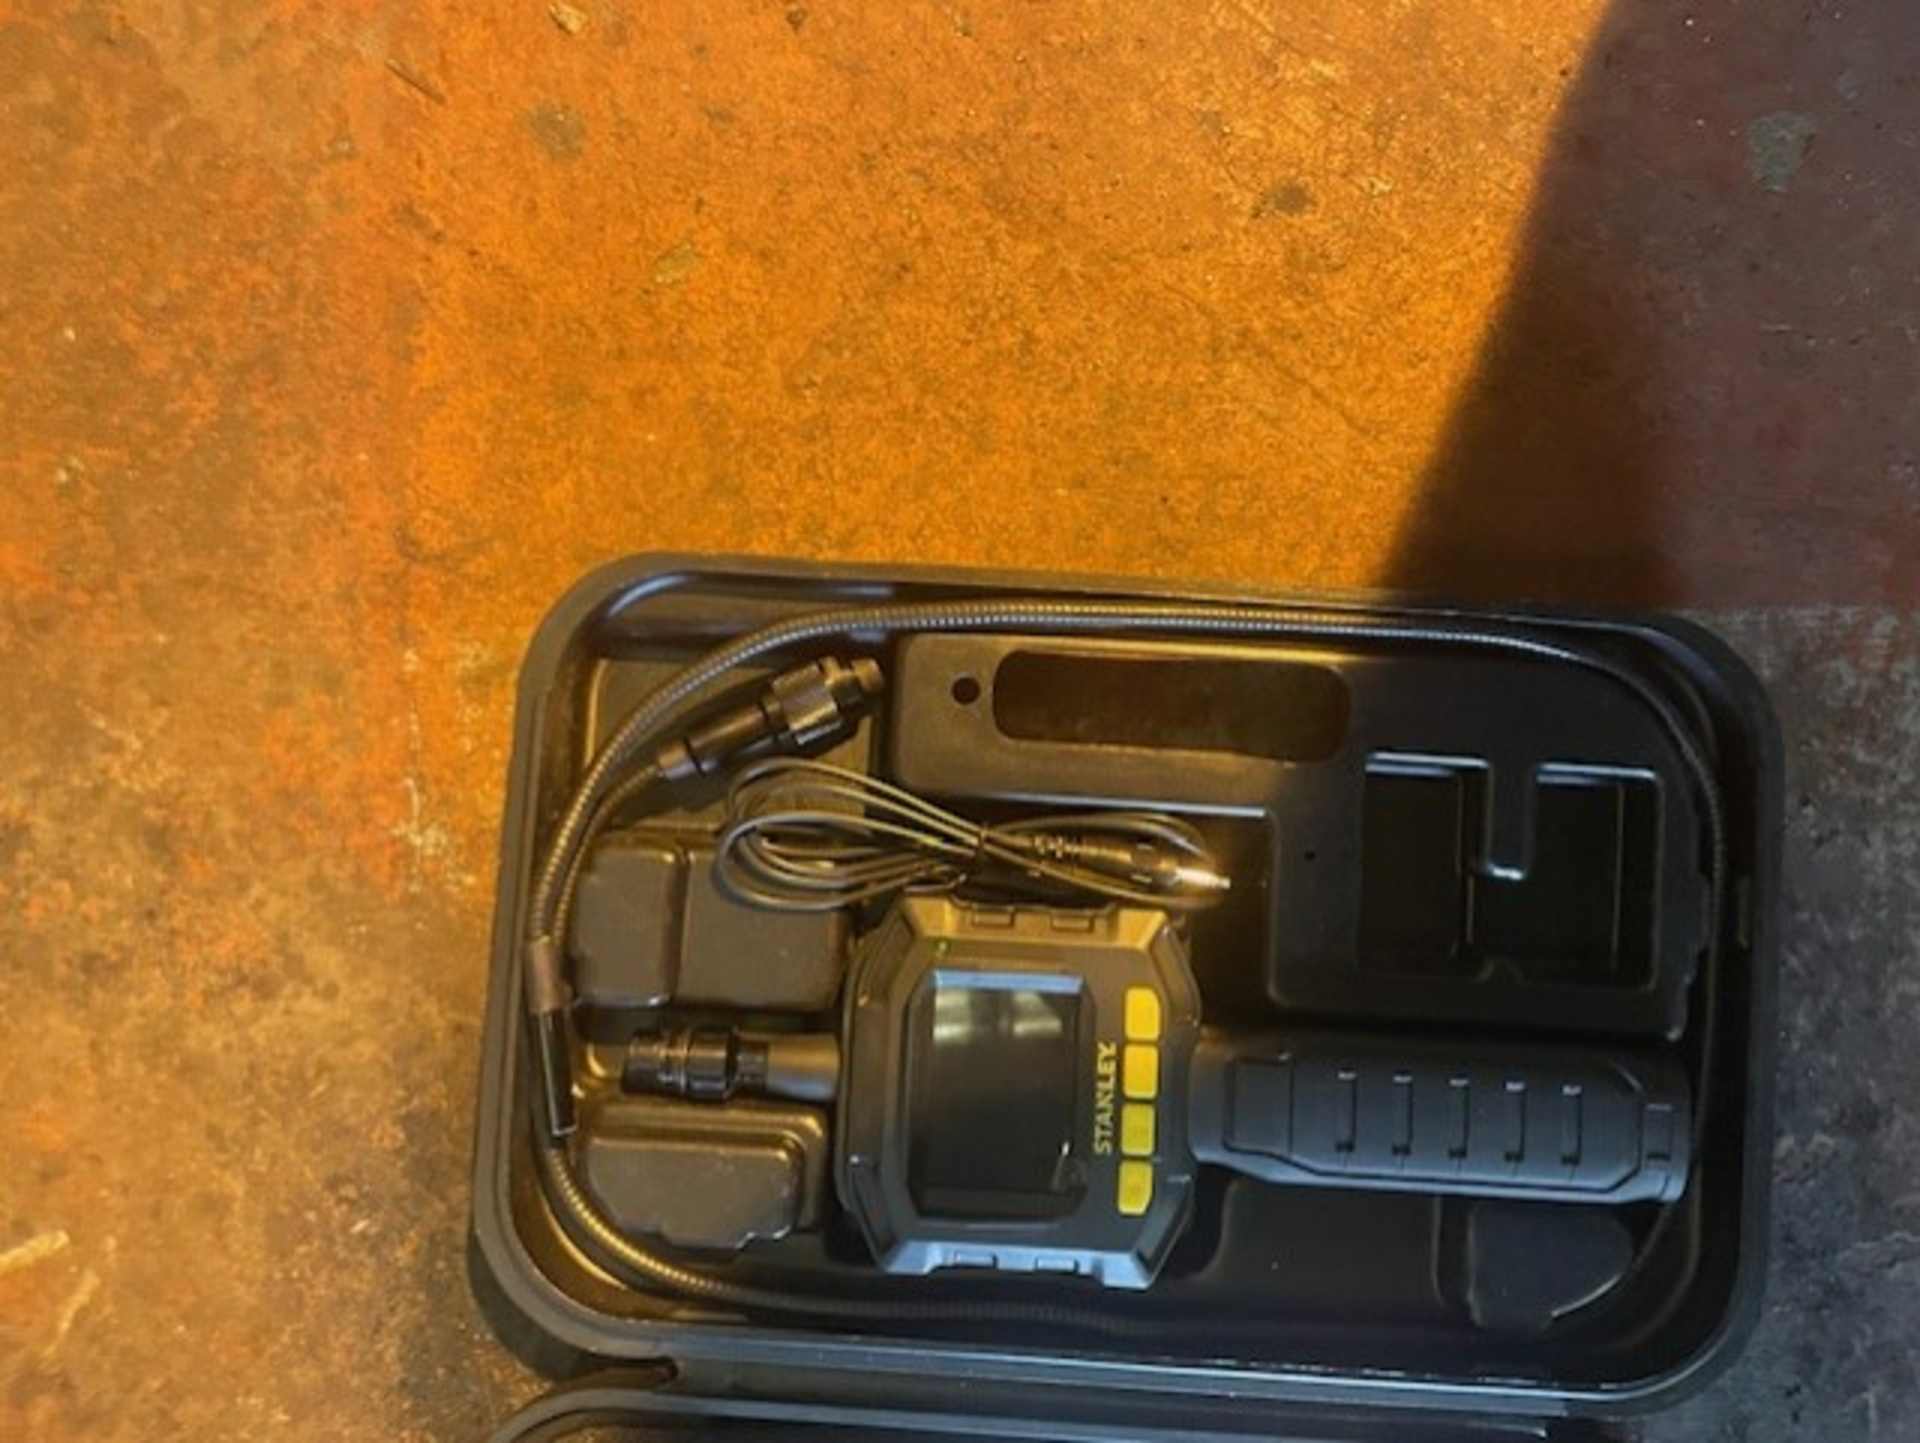 Inspection camera like brand new inside box very clean - Image 4 of 4